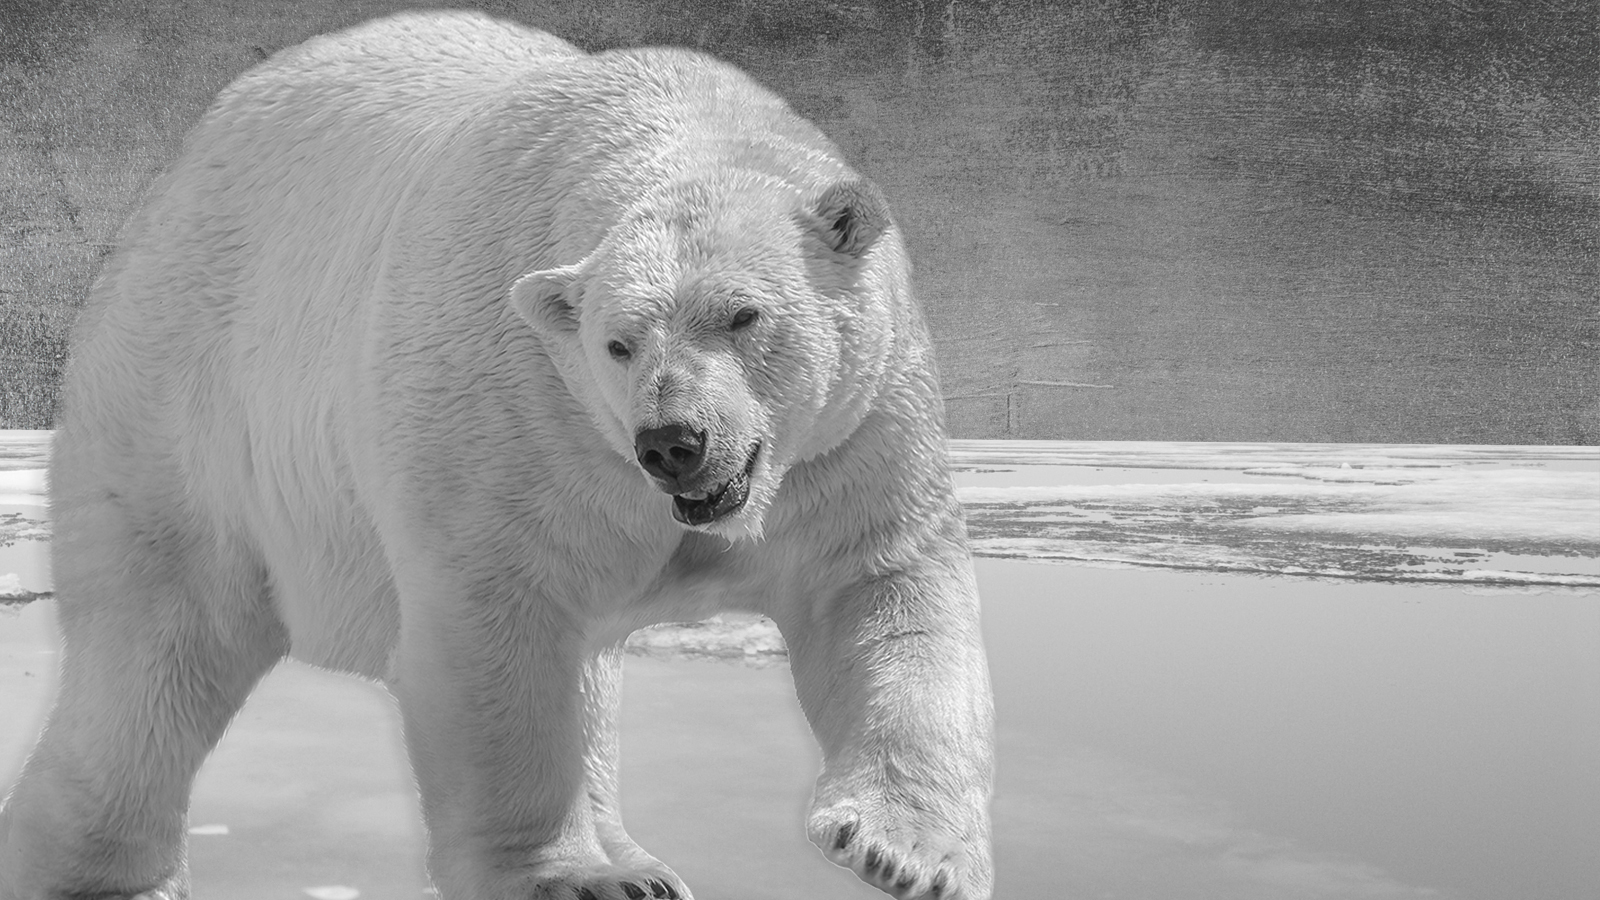 Deadly polar bear attack: Why more animals are attacking humans | The Week